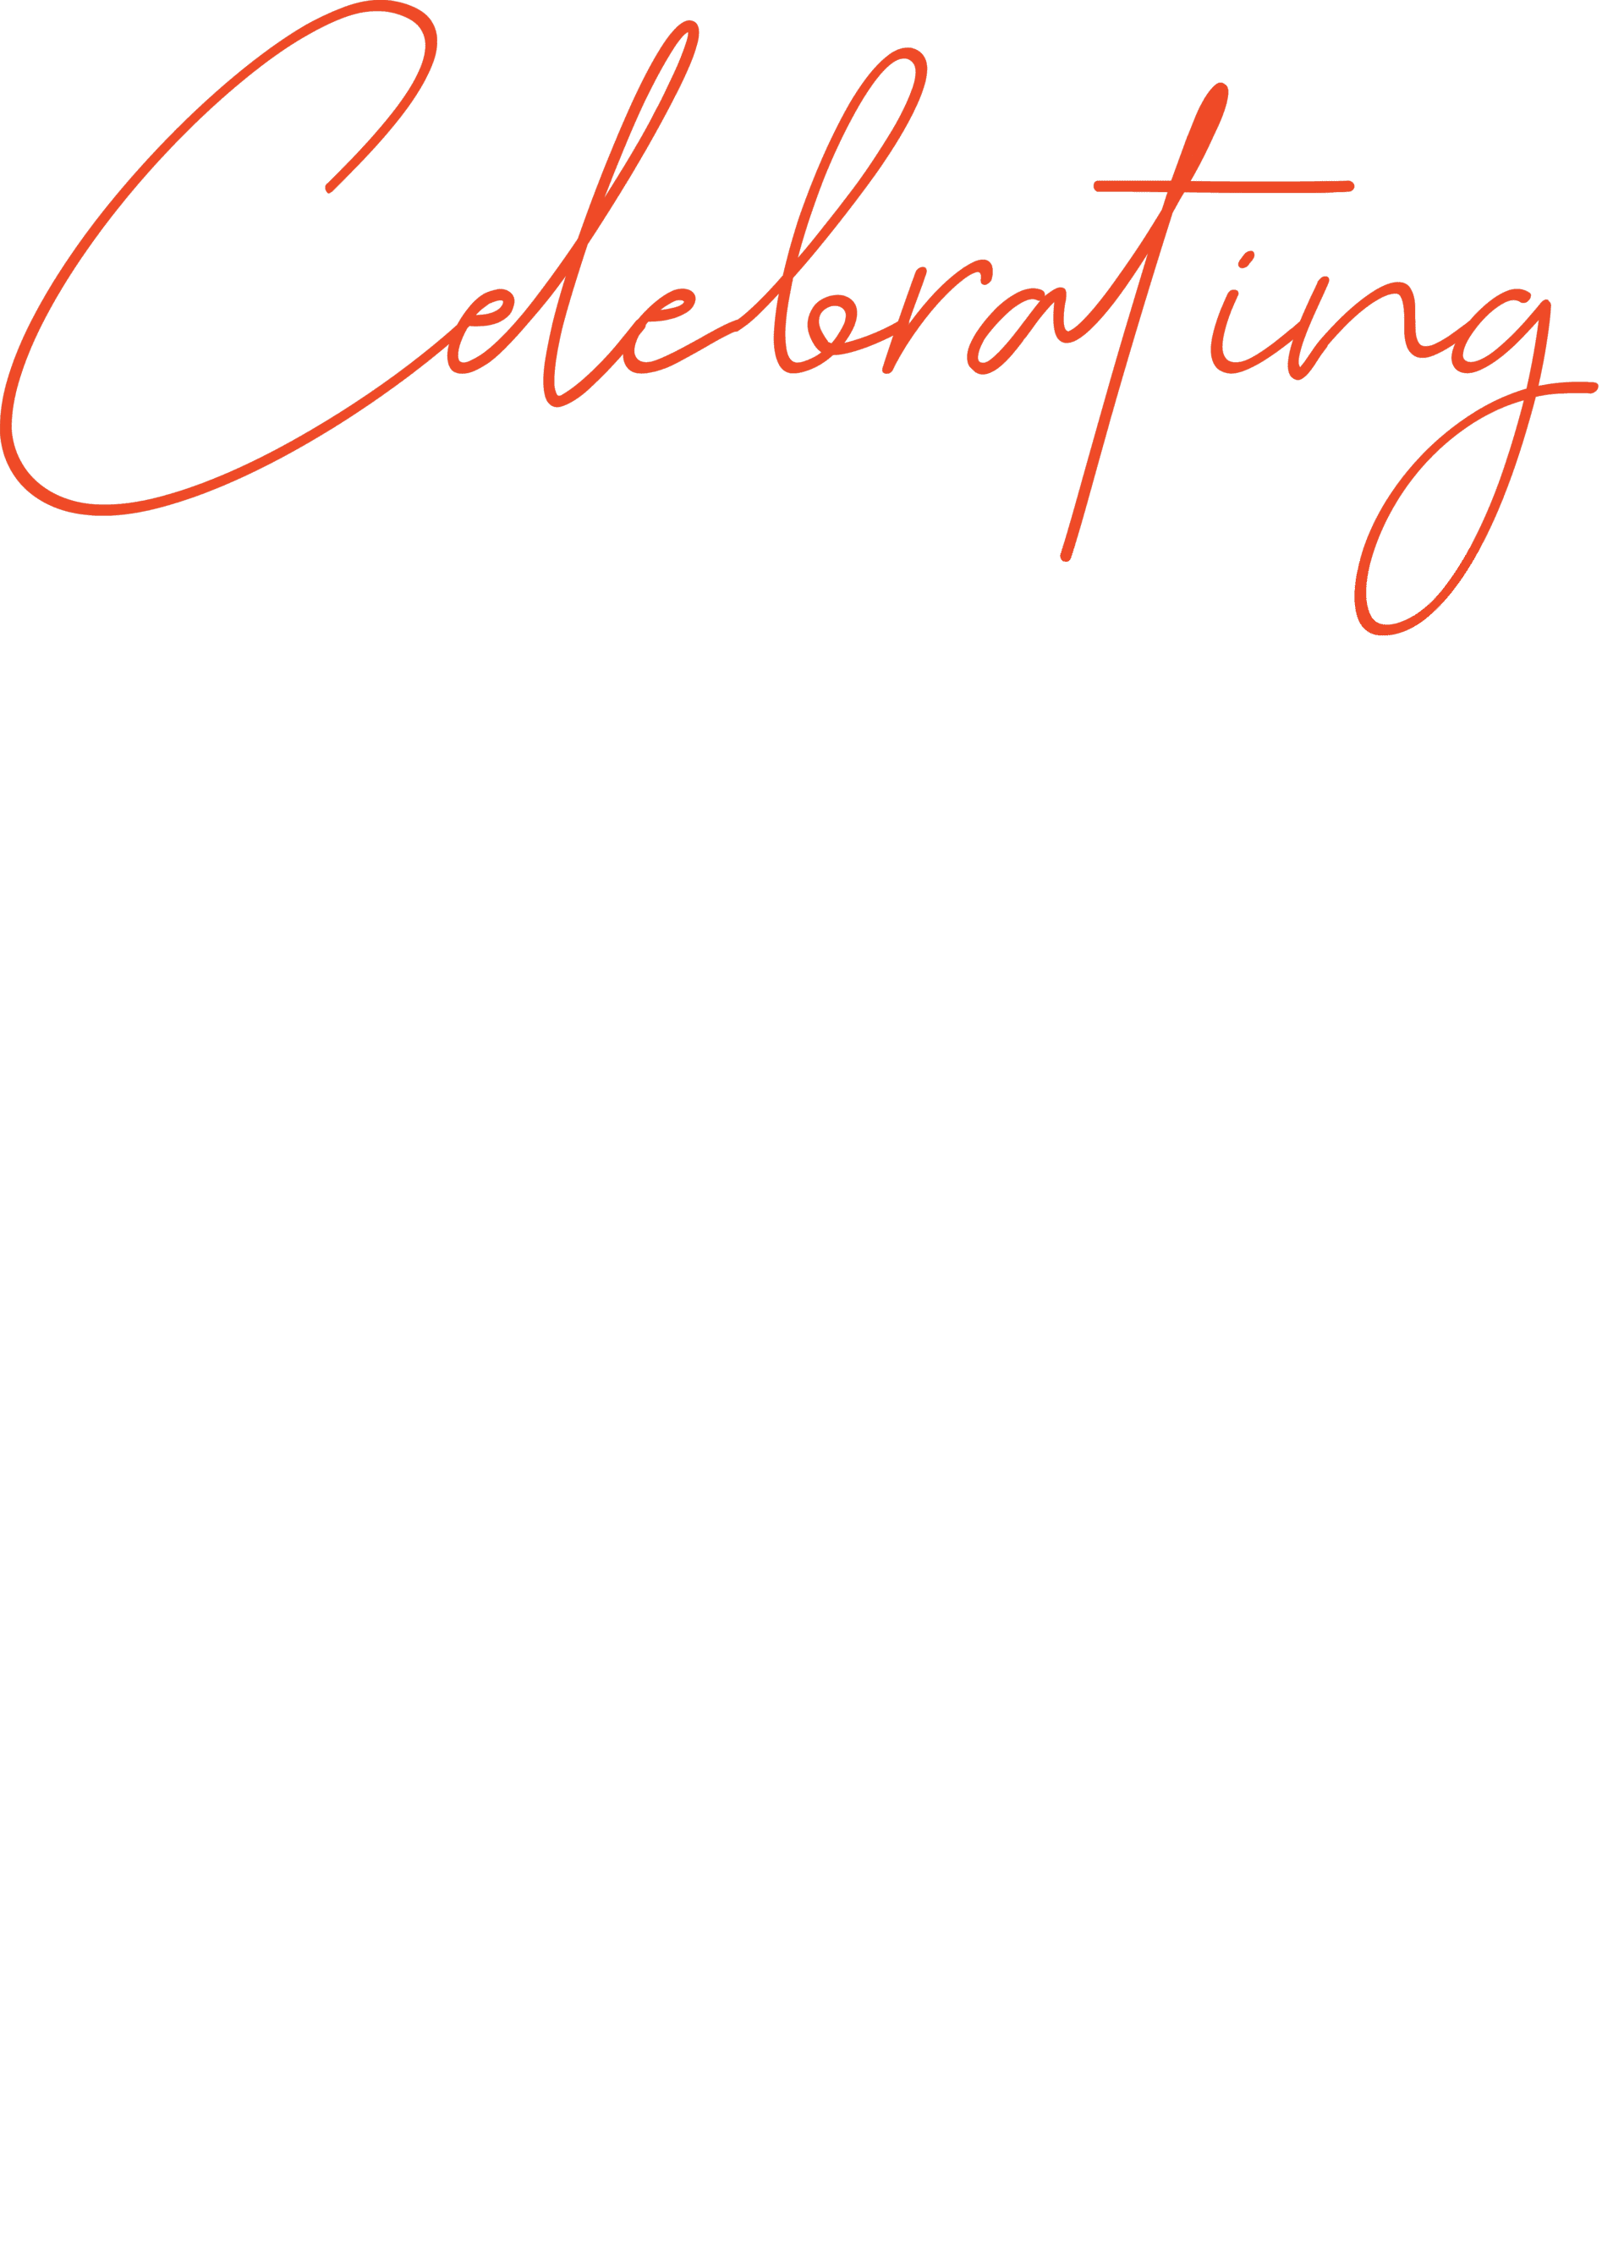 Celebrating 10 Years of Promoting Economic Growth While Embracing our Cultural Values & Traditions